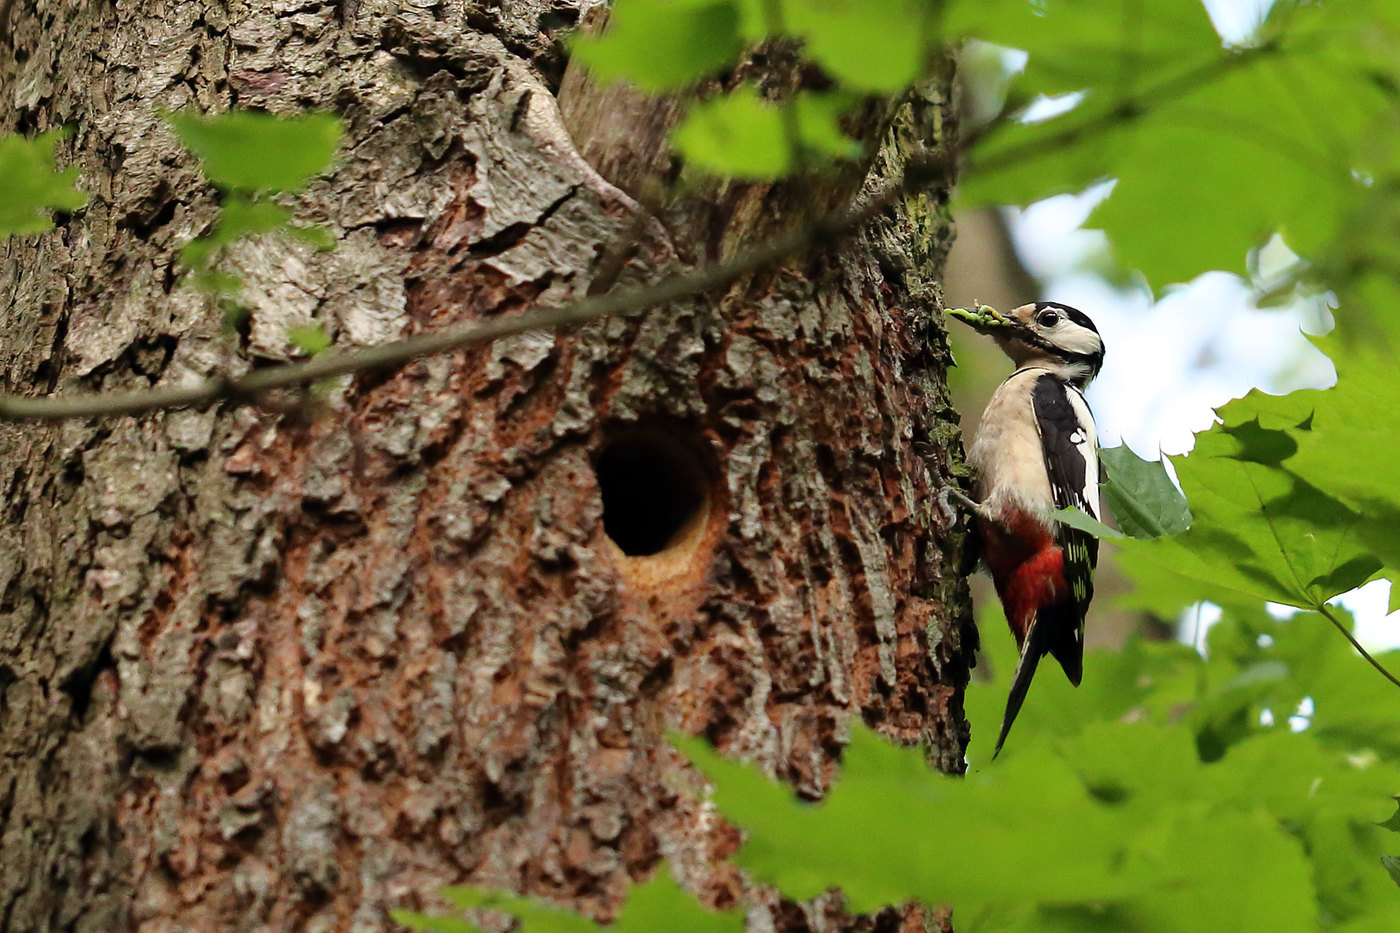 Female woodpecker at the nest